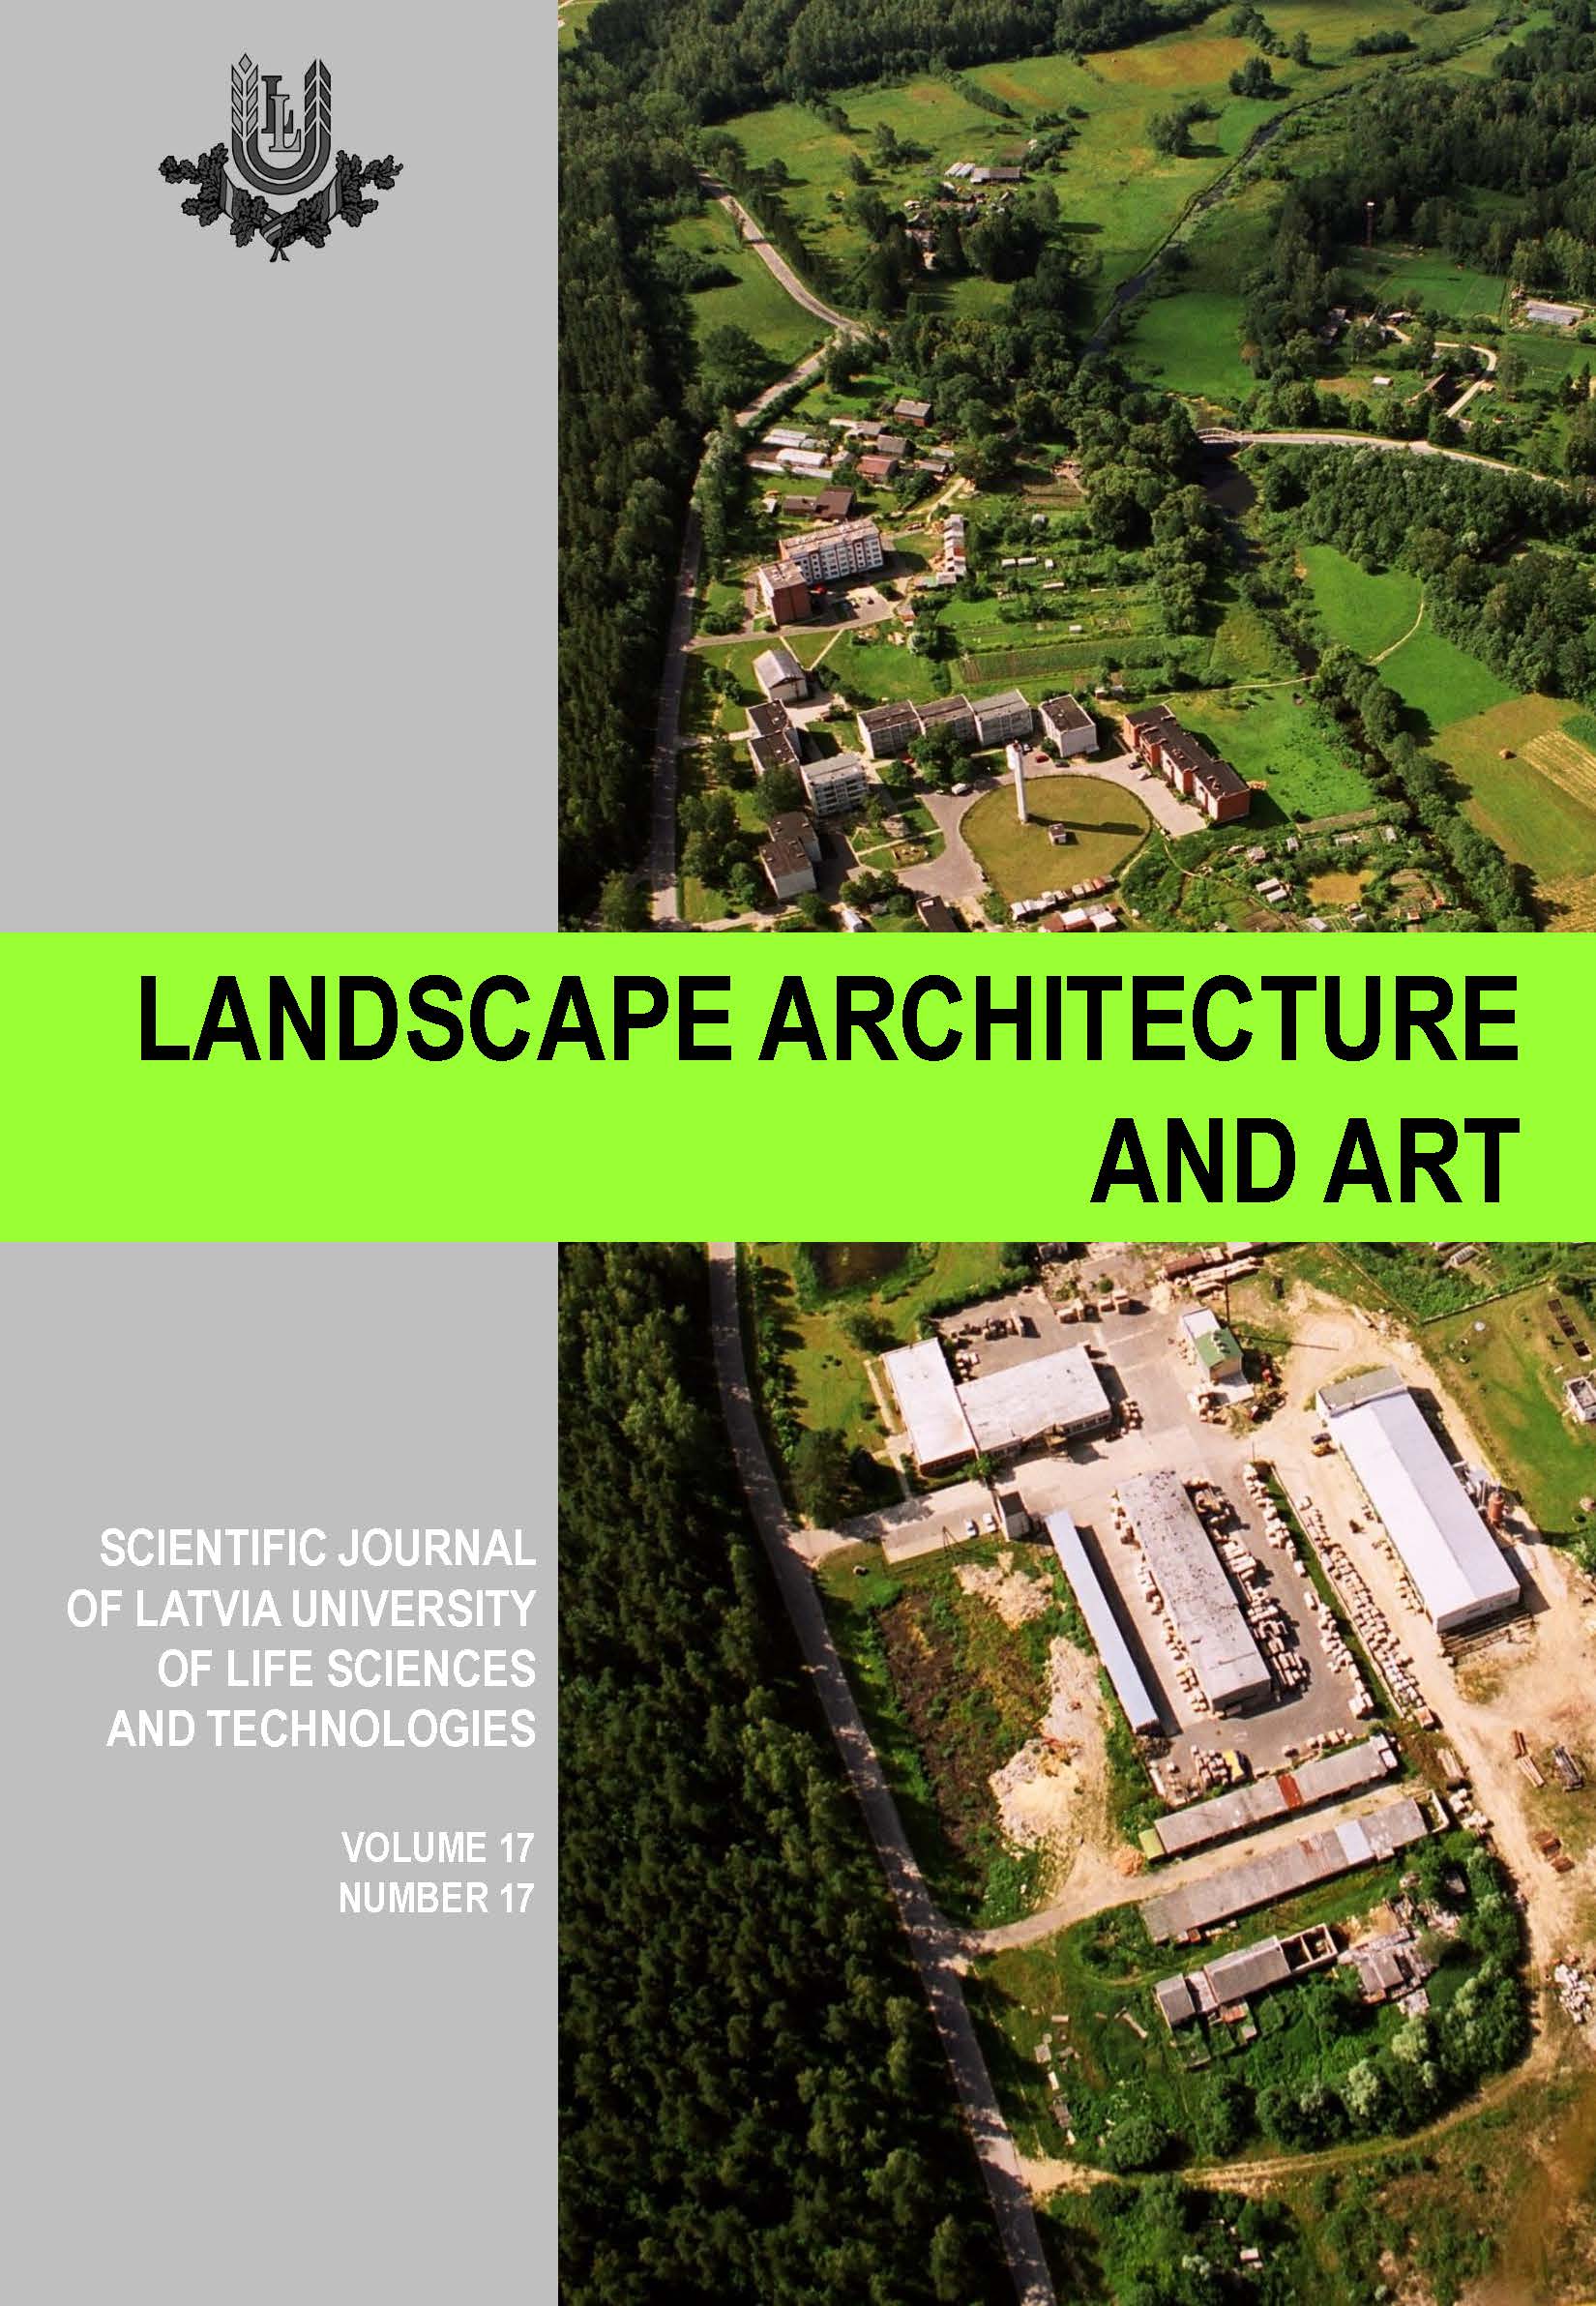 Landscape architecture and art : scientific journal of the Latvia University of Life Sciences and Technologies / Latvia University of Life Sciences and Technologies. Jelgava : Latvia University of Agriculture. Volume 17, Number 17, 2020, 88 p. E-ISSN 2255-8640